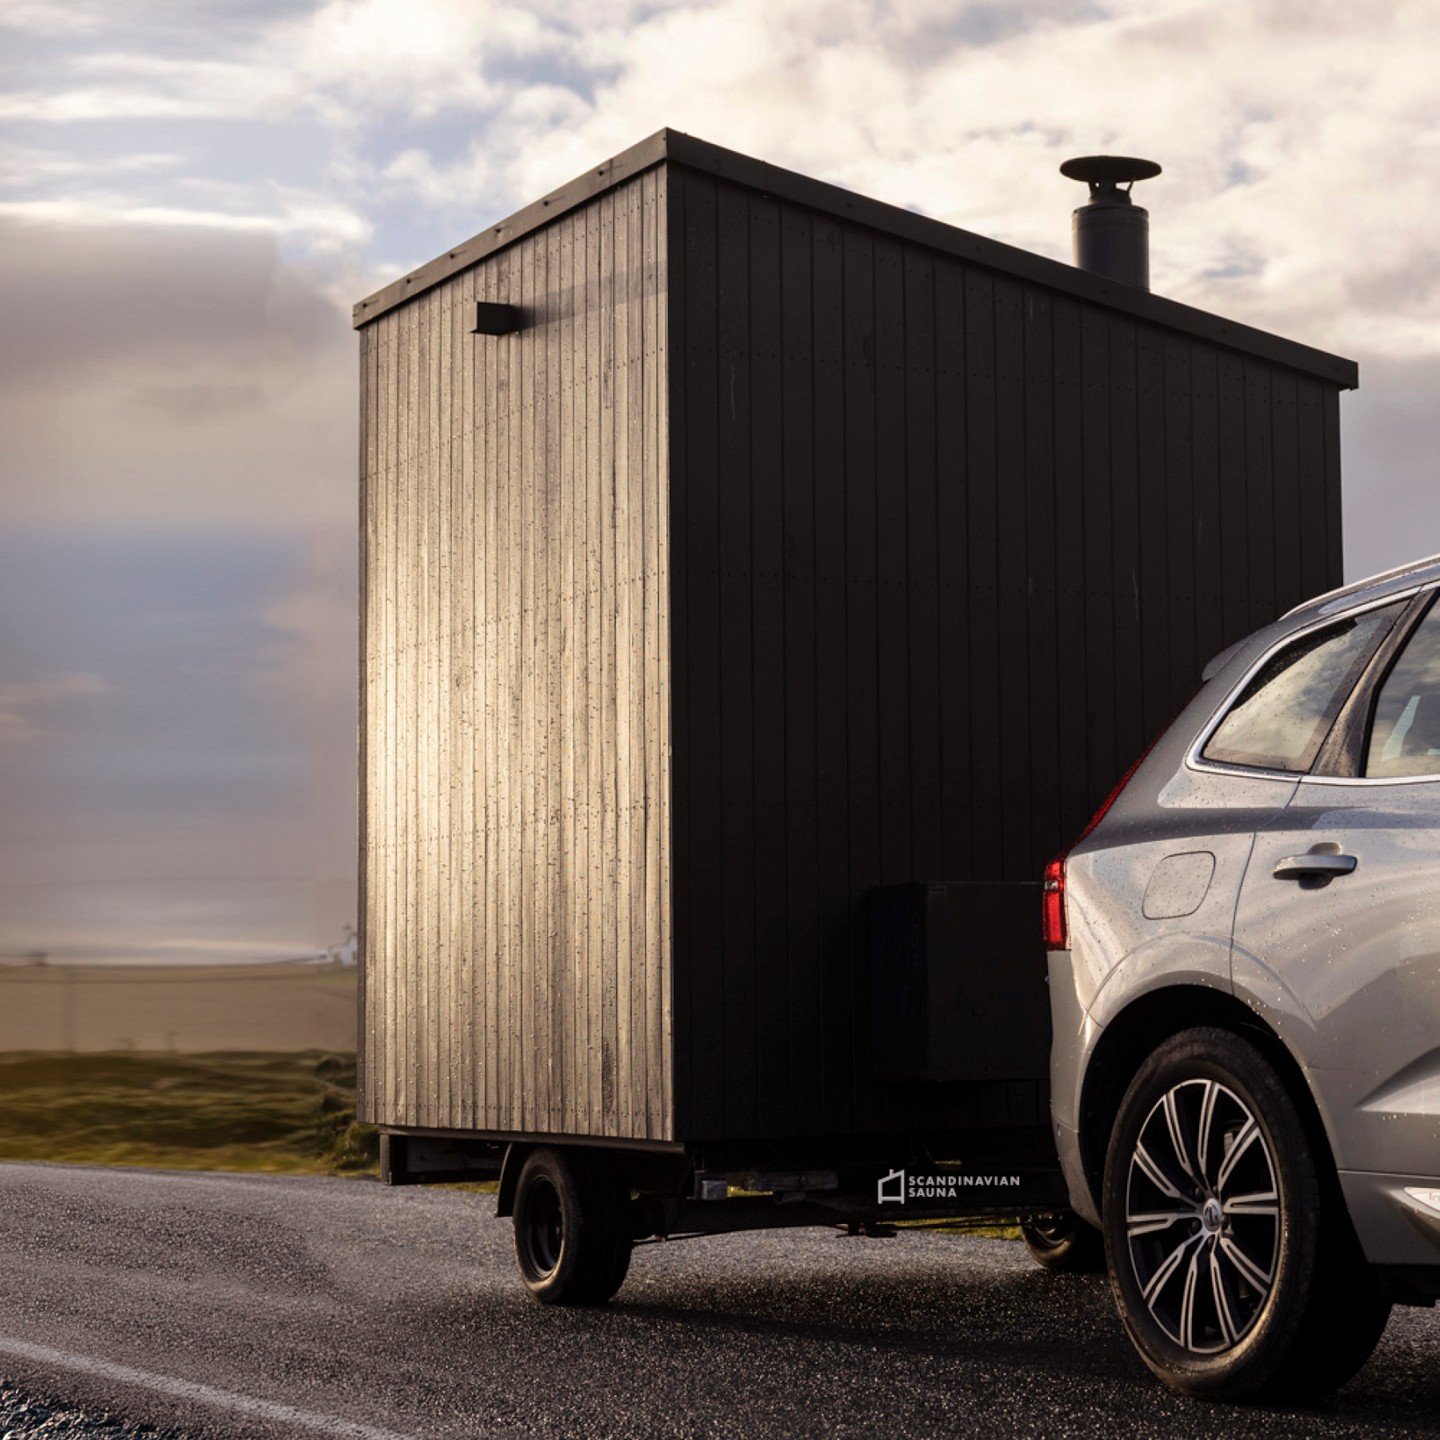 With full mobility comes endless possibilities, Where are you taking yours?

photo by @seanbreithaupt 

@volvocardanmark @volvocarsie @volvo_germany @volvocarch 
#Scandinaviansauna
#nordicdesign
#MobileSaunaExperience
#ScandinavianWellness
#EcoLuxury